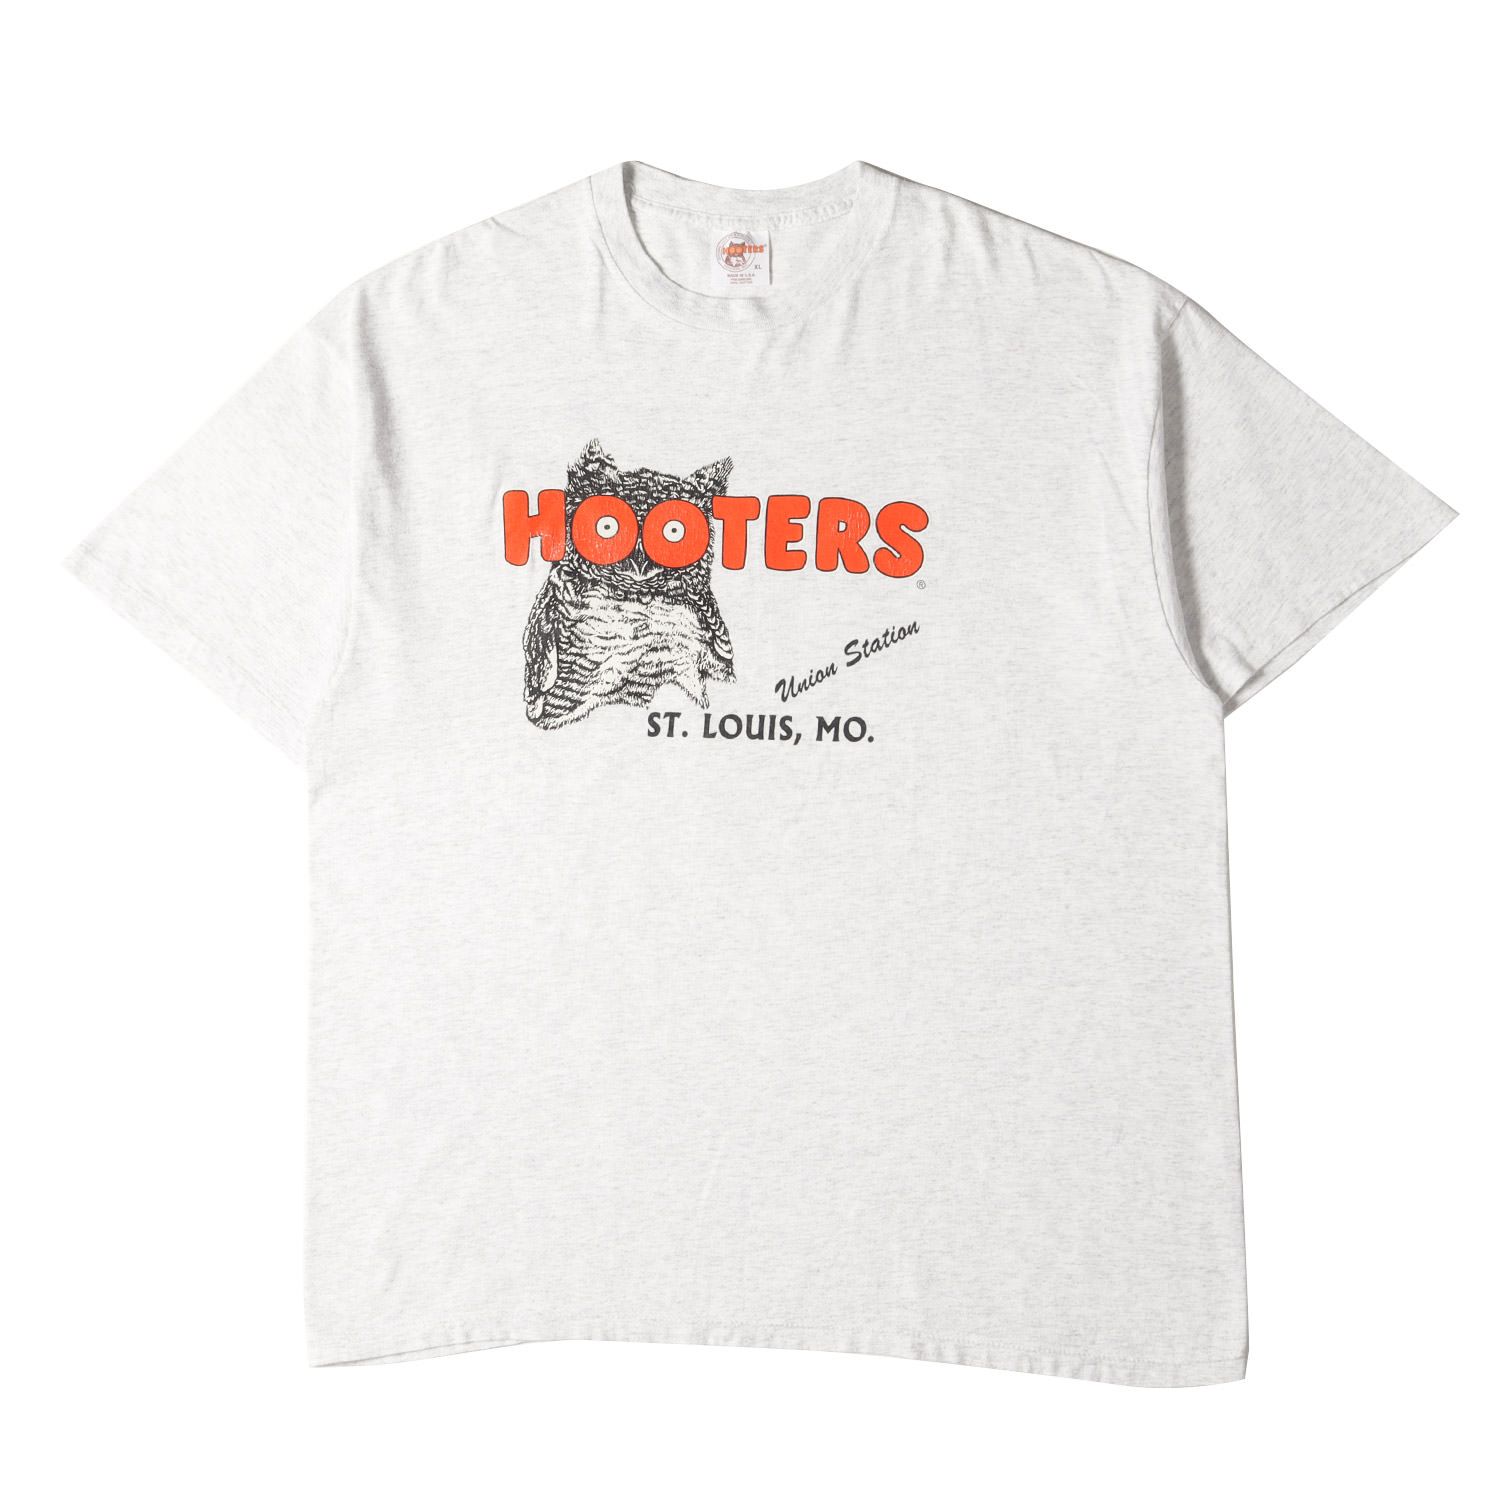 90S USA製 HOOTERS フーターズ ヴィンテージ Tシャツ